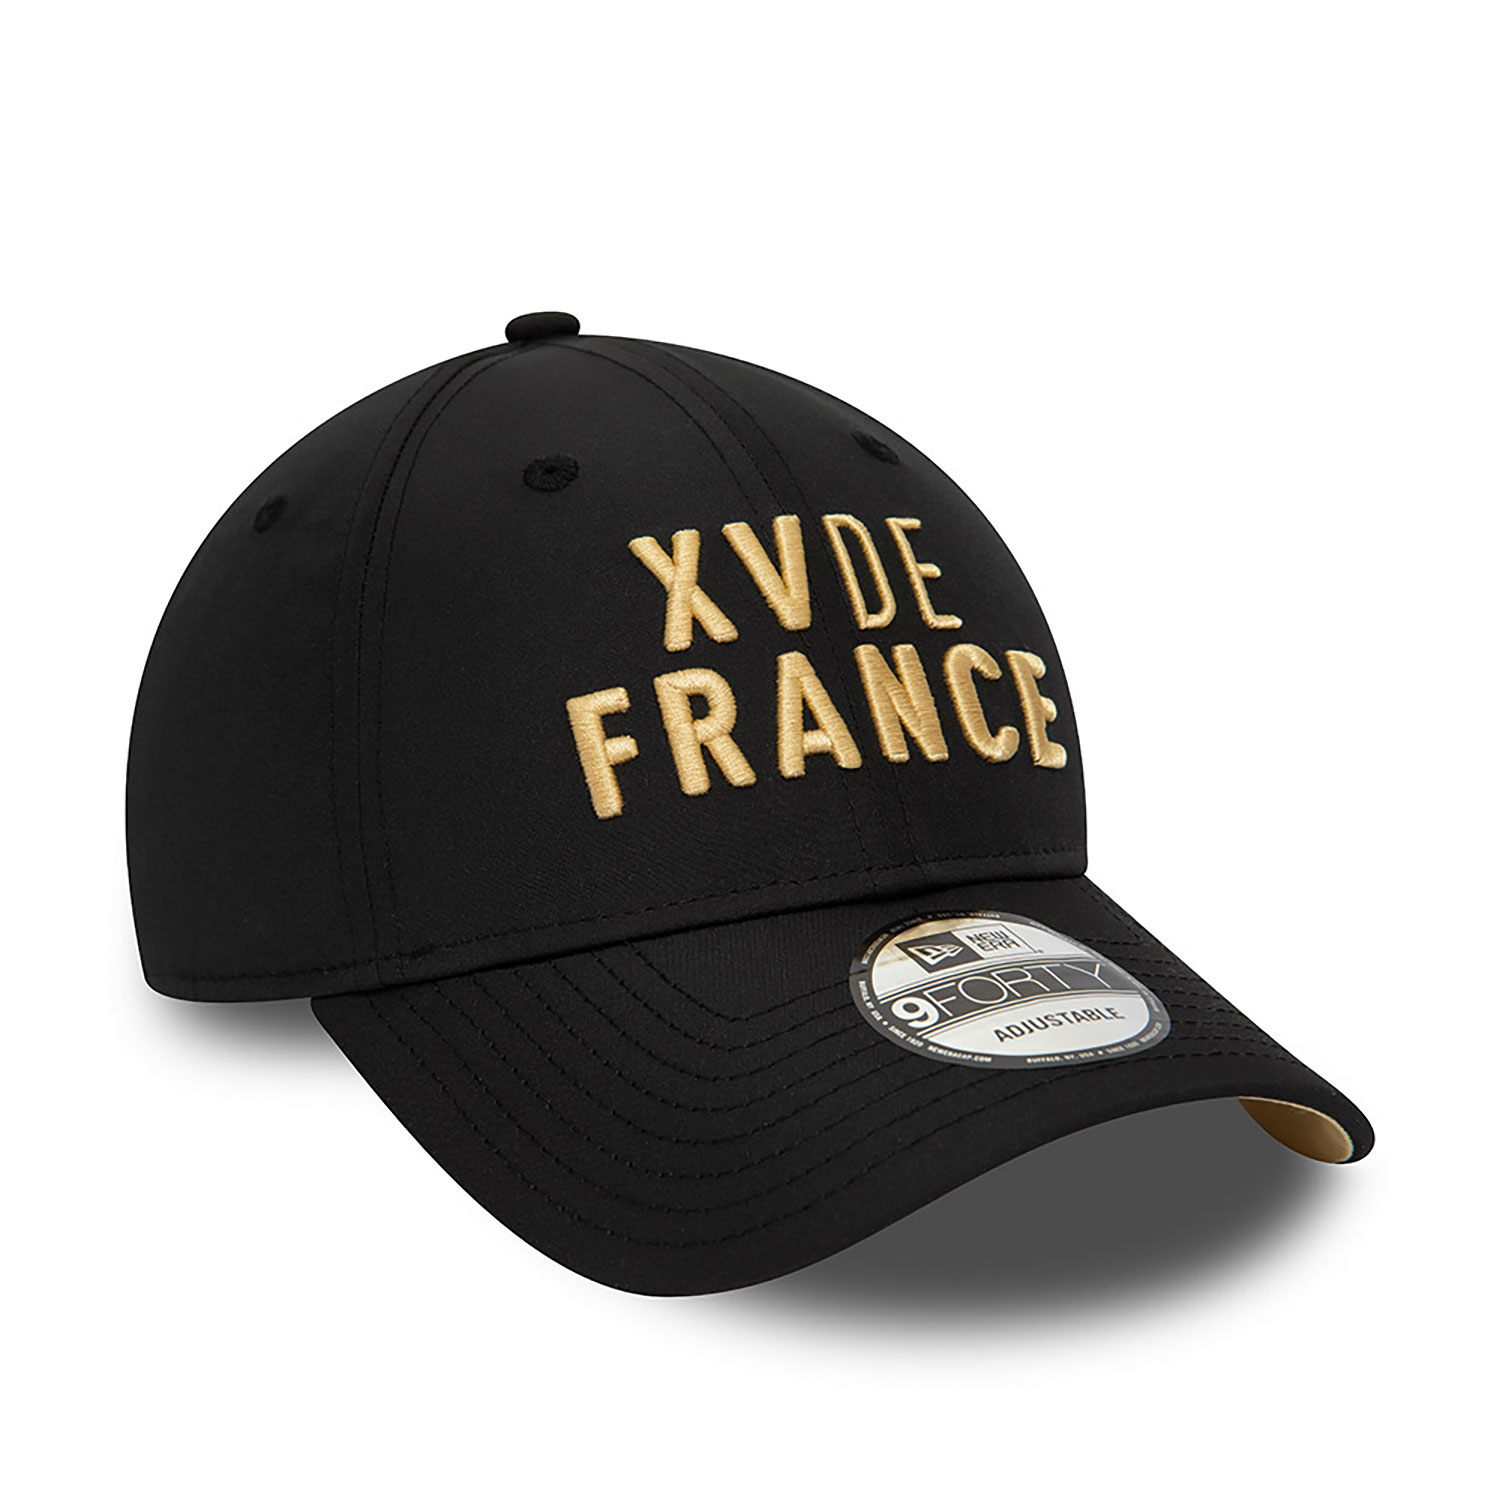 French Federation Of Rugby Wordmark Black 9FORTY Adjustable Cap